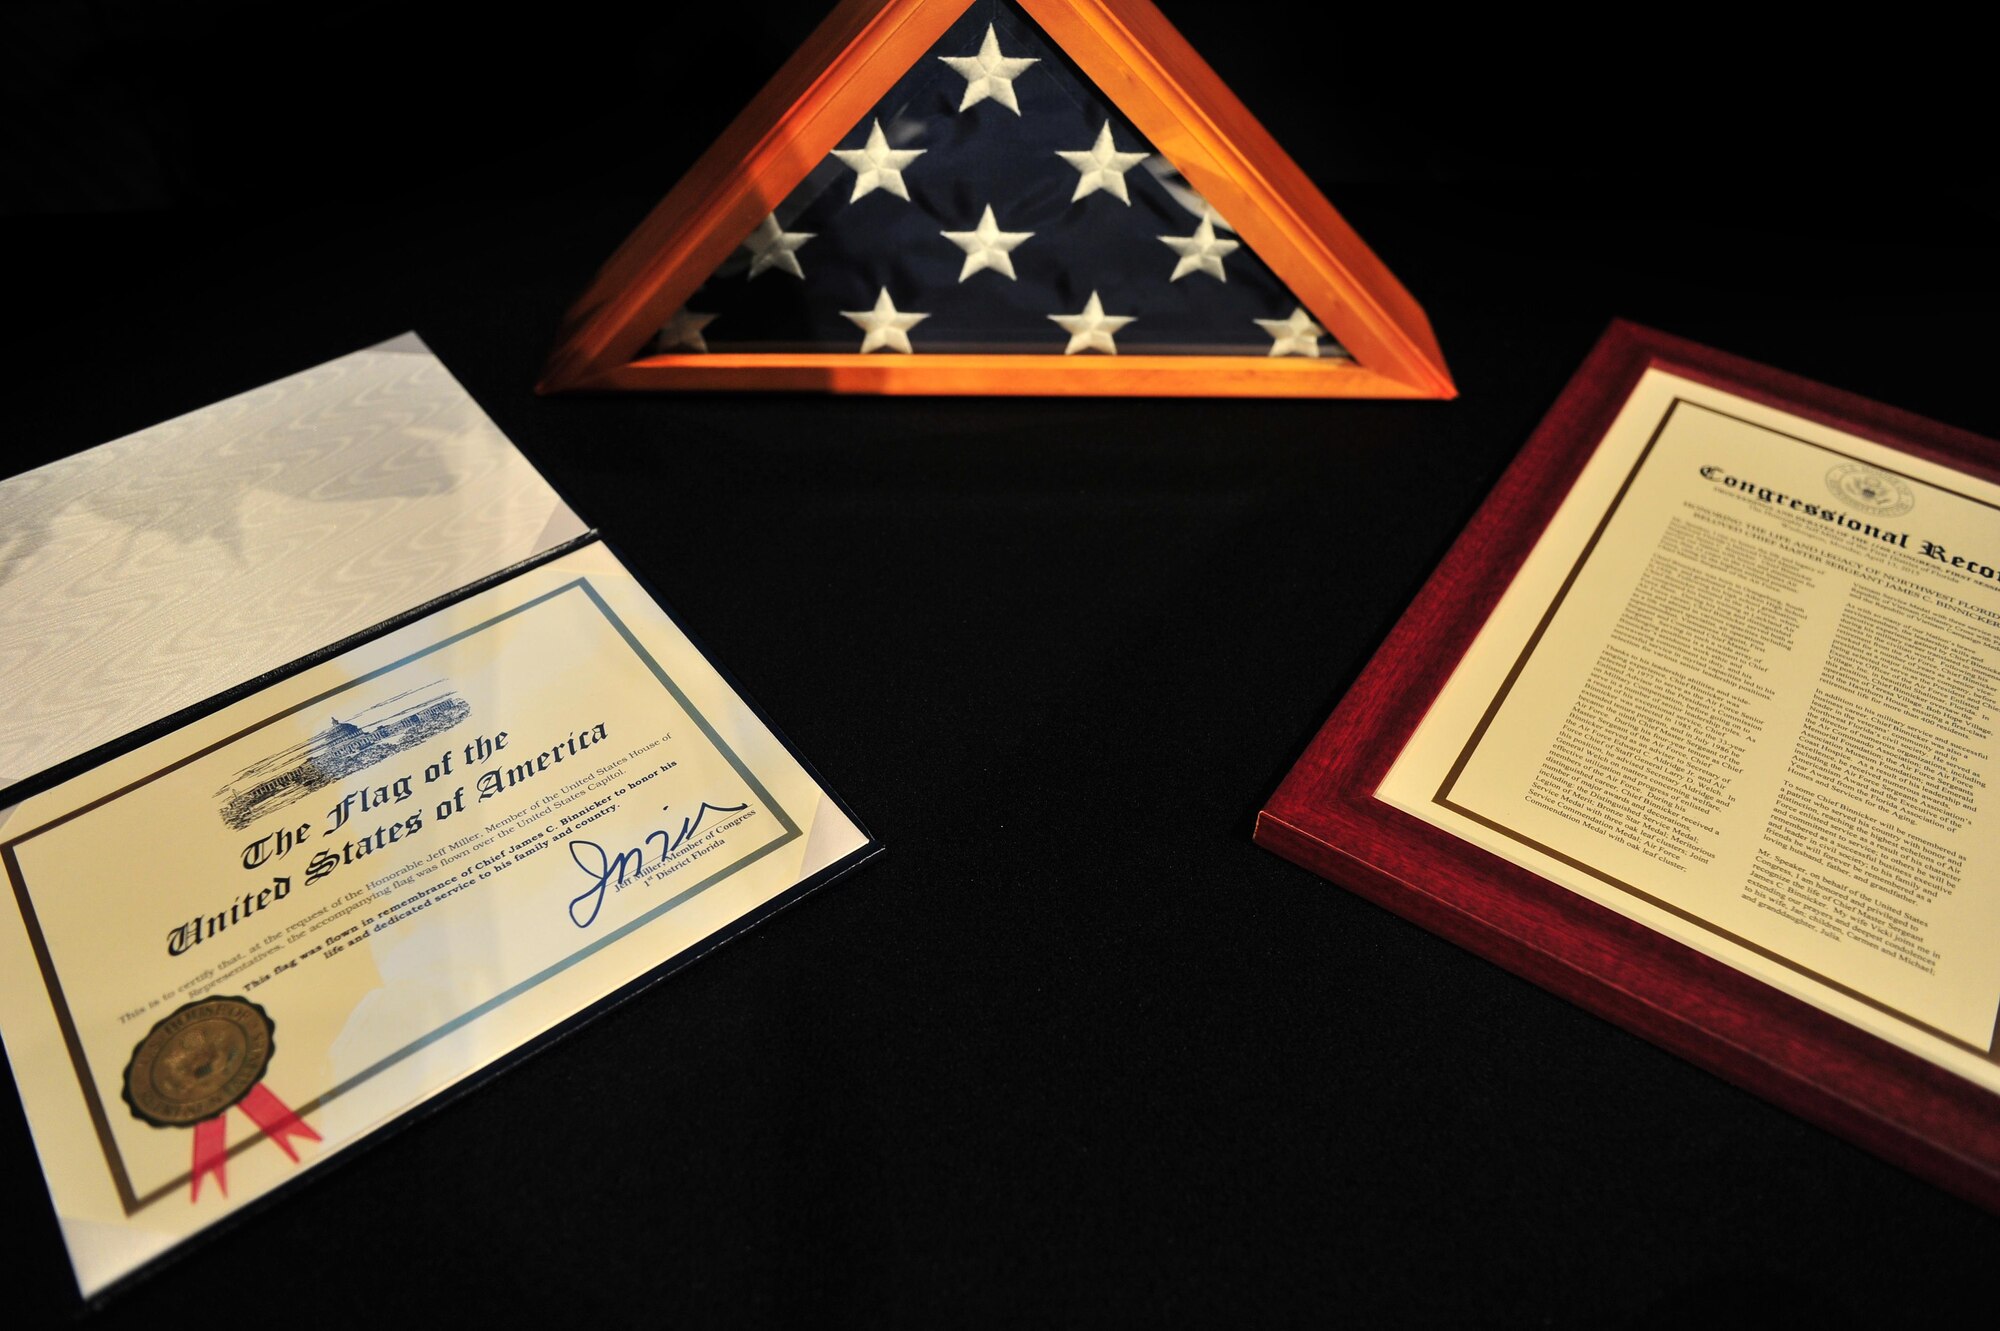 A flag flown over Capitol Hill in honor of Chief Master Sgt. of the Air Force #9 James C. Binnicker’s life is on display during his celebration of life ceremony at the Emerald Coast Convention Center, Fort Walton Beach, Fla., March 28, 2015. During his tenure as the ninth chief master sergeant of the Air Force, Binnicker led the transformation from the Airman Performance Report to the Enlisted Performance Report, and developed the performance feedback system. He also worked to have master sergeants admitted to the Air Force Senior NCO Academy, and to increase the opportunities for minorities and women throughout the Air Force.  (U.S. Air Force photo by Airman 1st Class Ryan Conroy/Released)